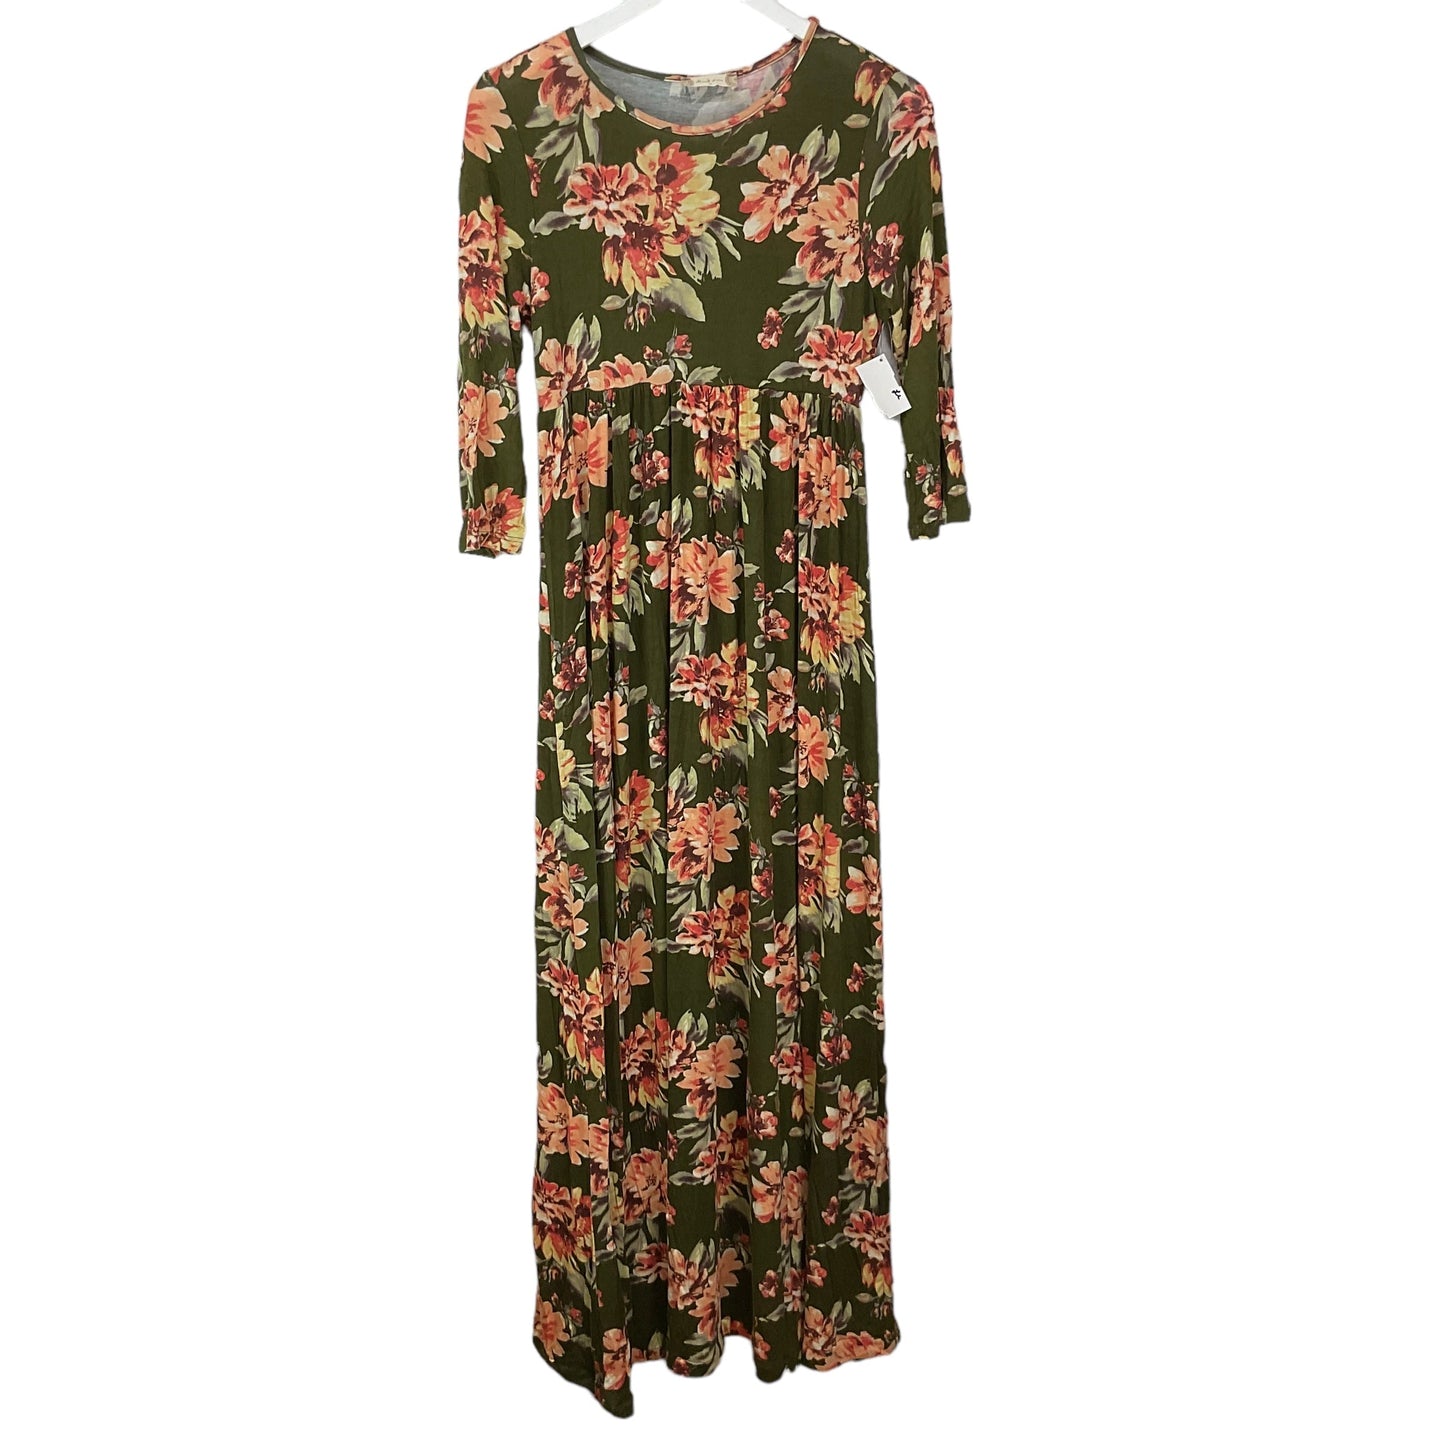 Floral Print Dress Casual Maxi Altard State, Size M